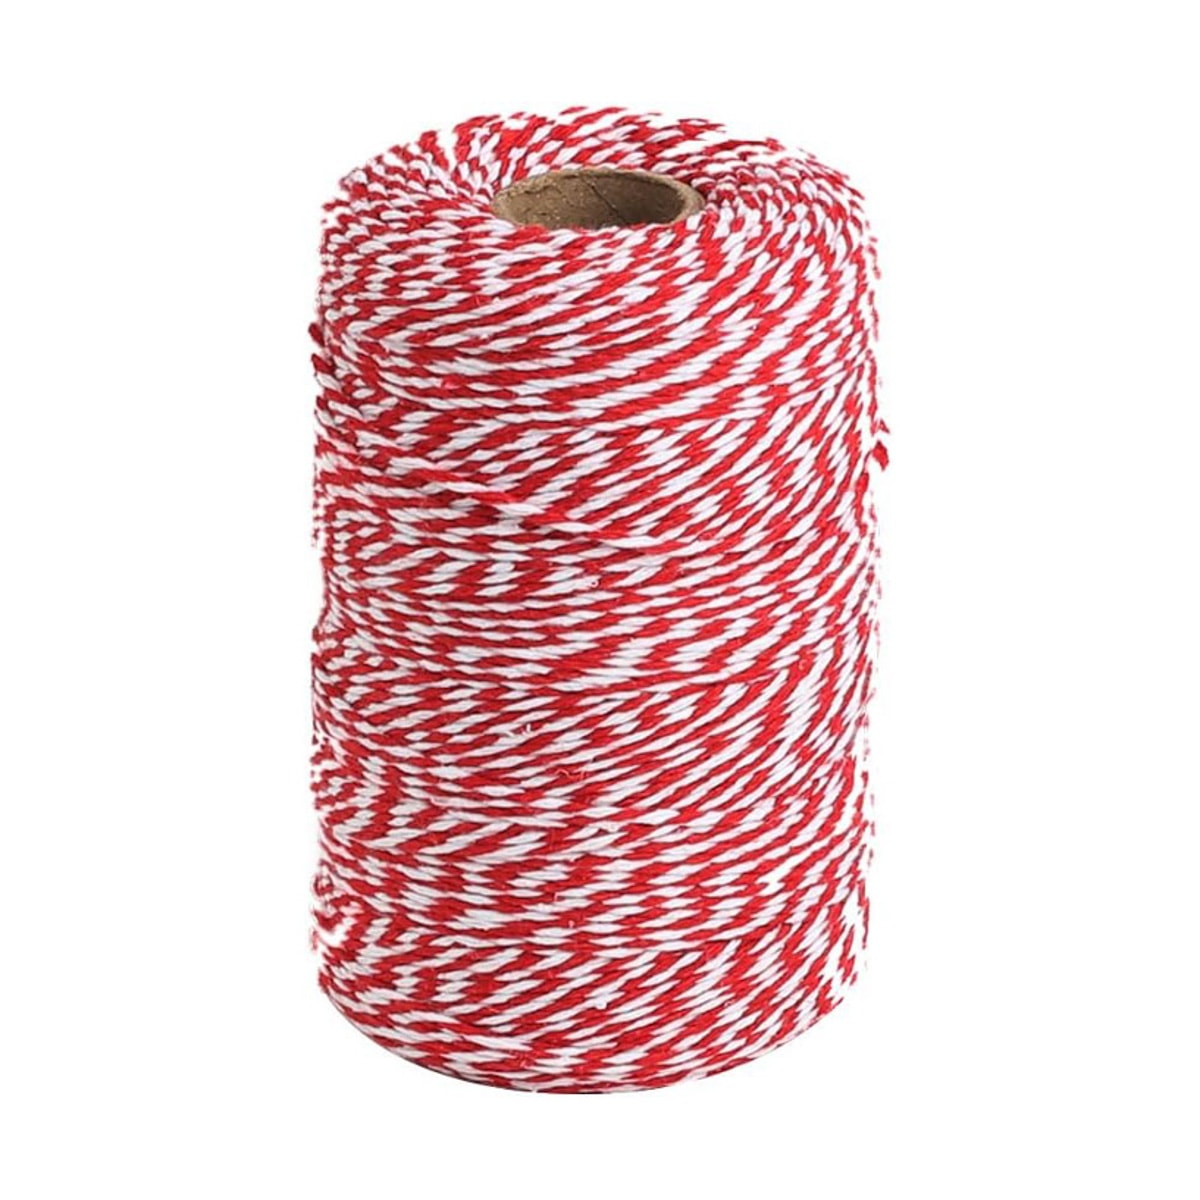 Red and white twine.